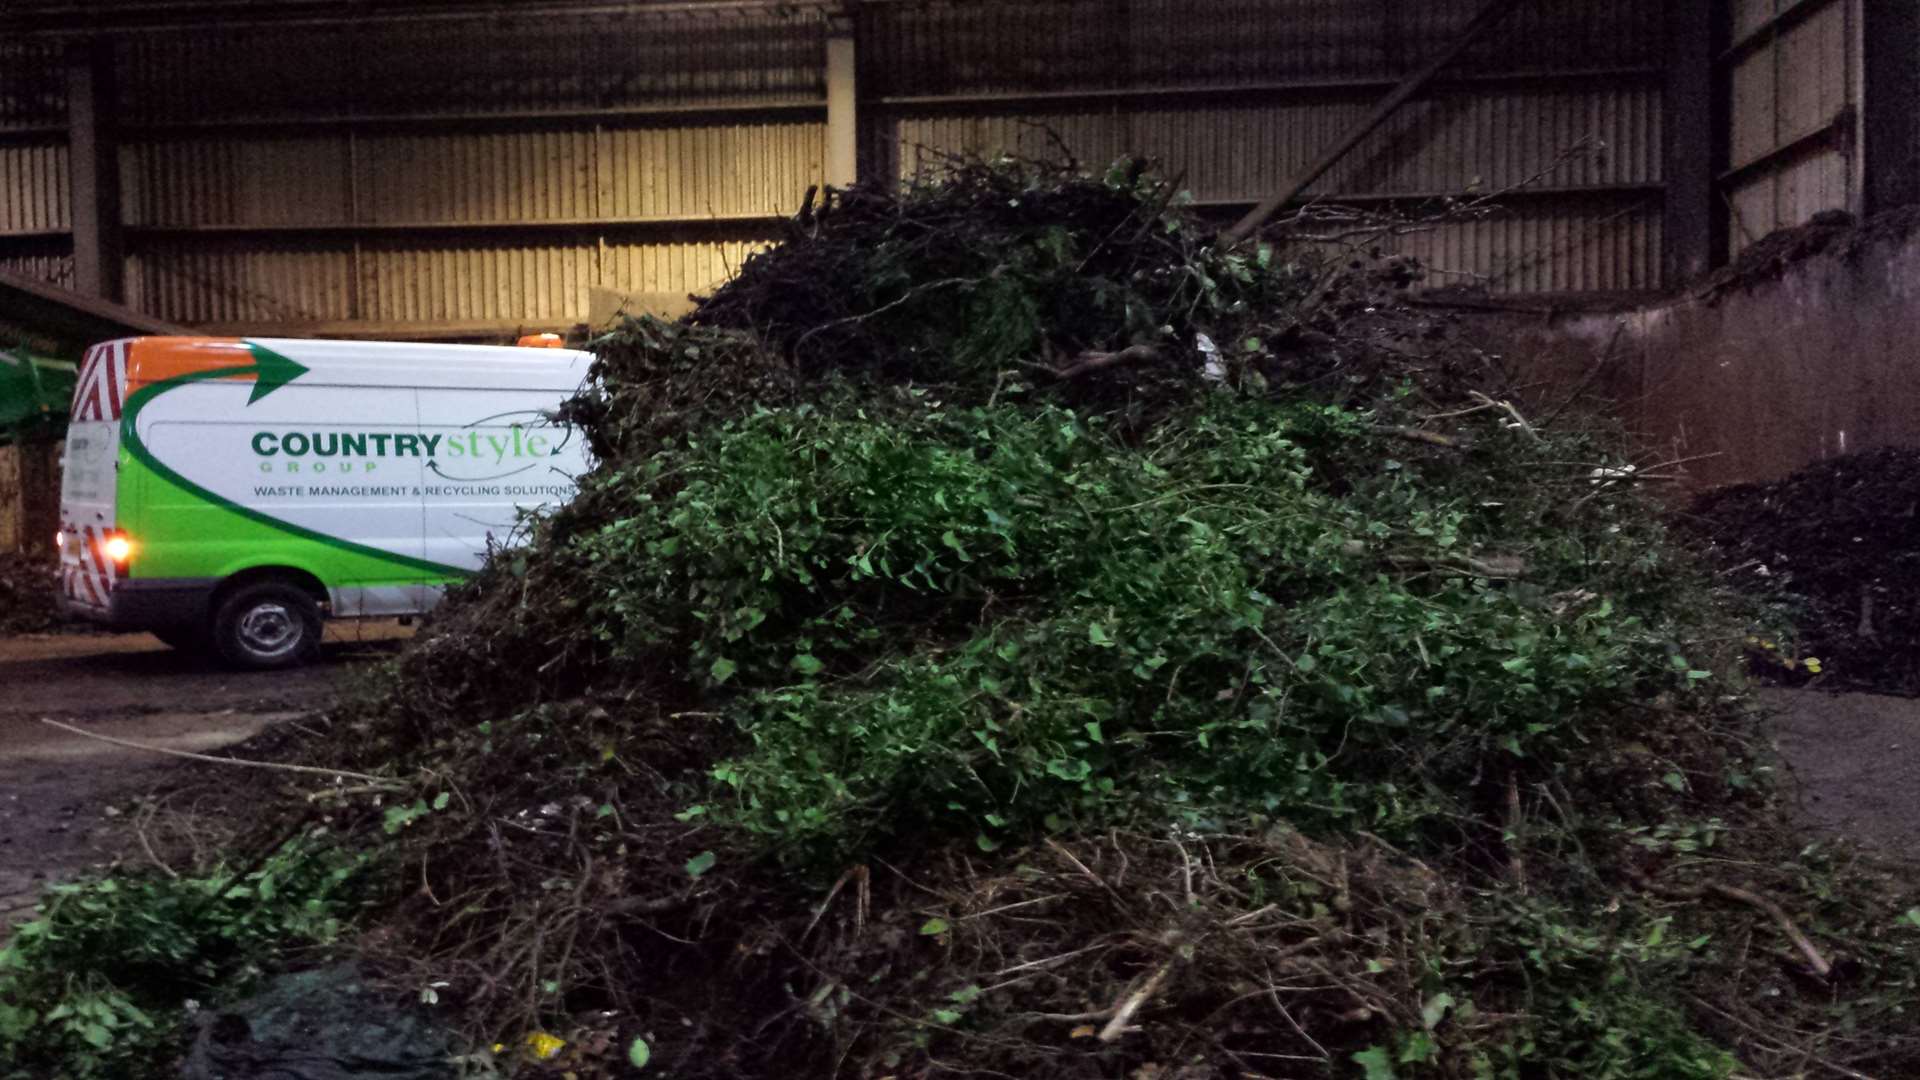 Countrystyle Recycling manages greenand food waste at its plant in Ridham, near Sittingbourne